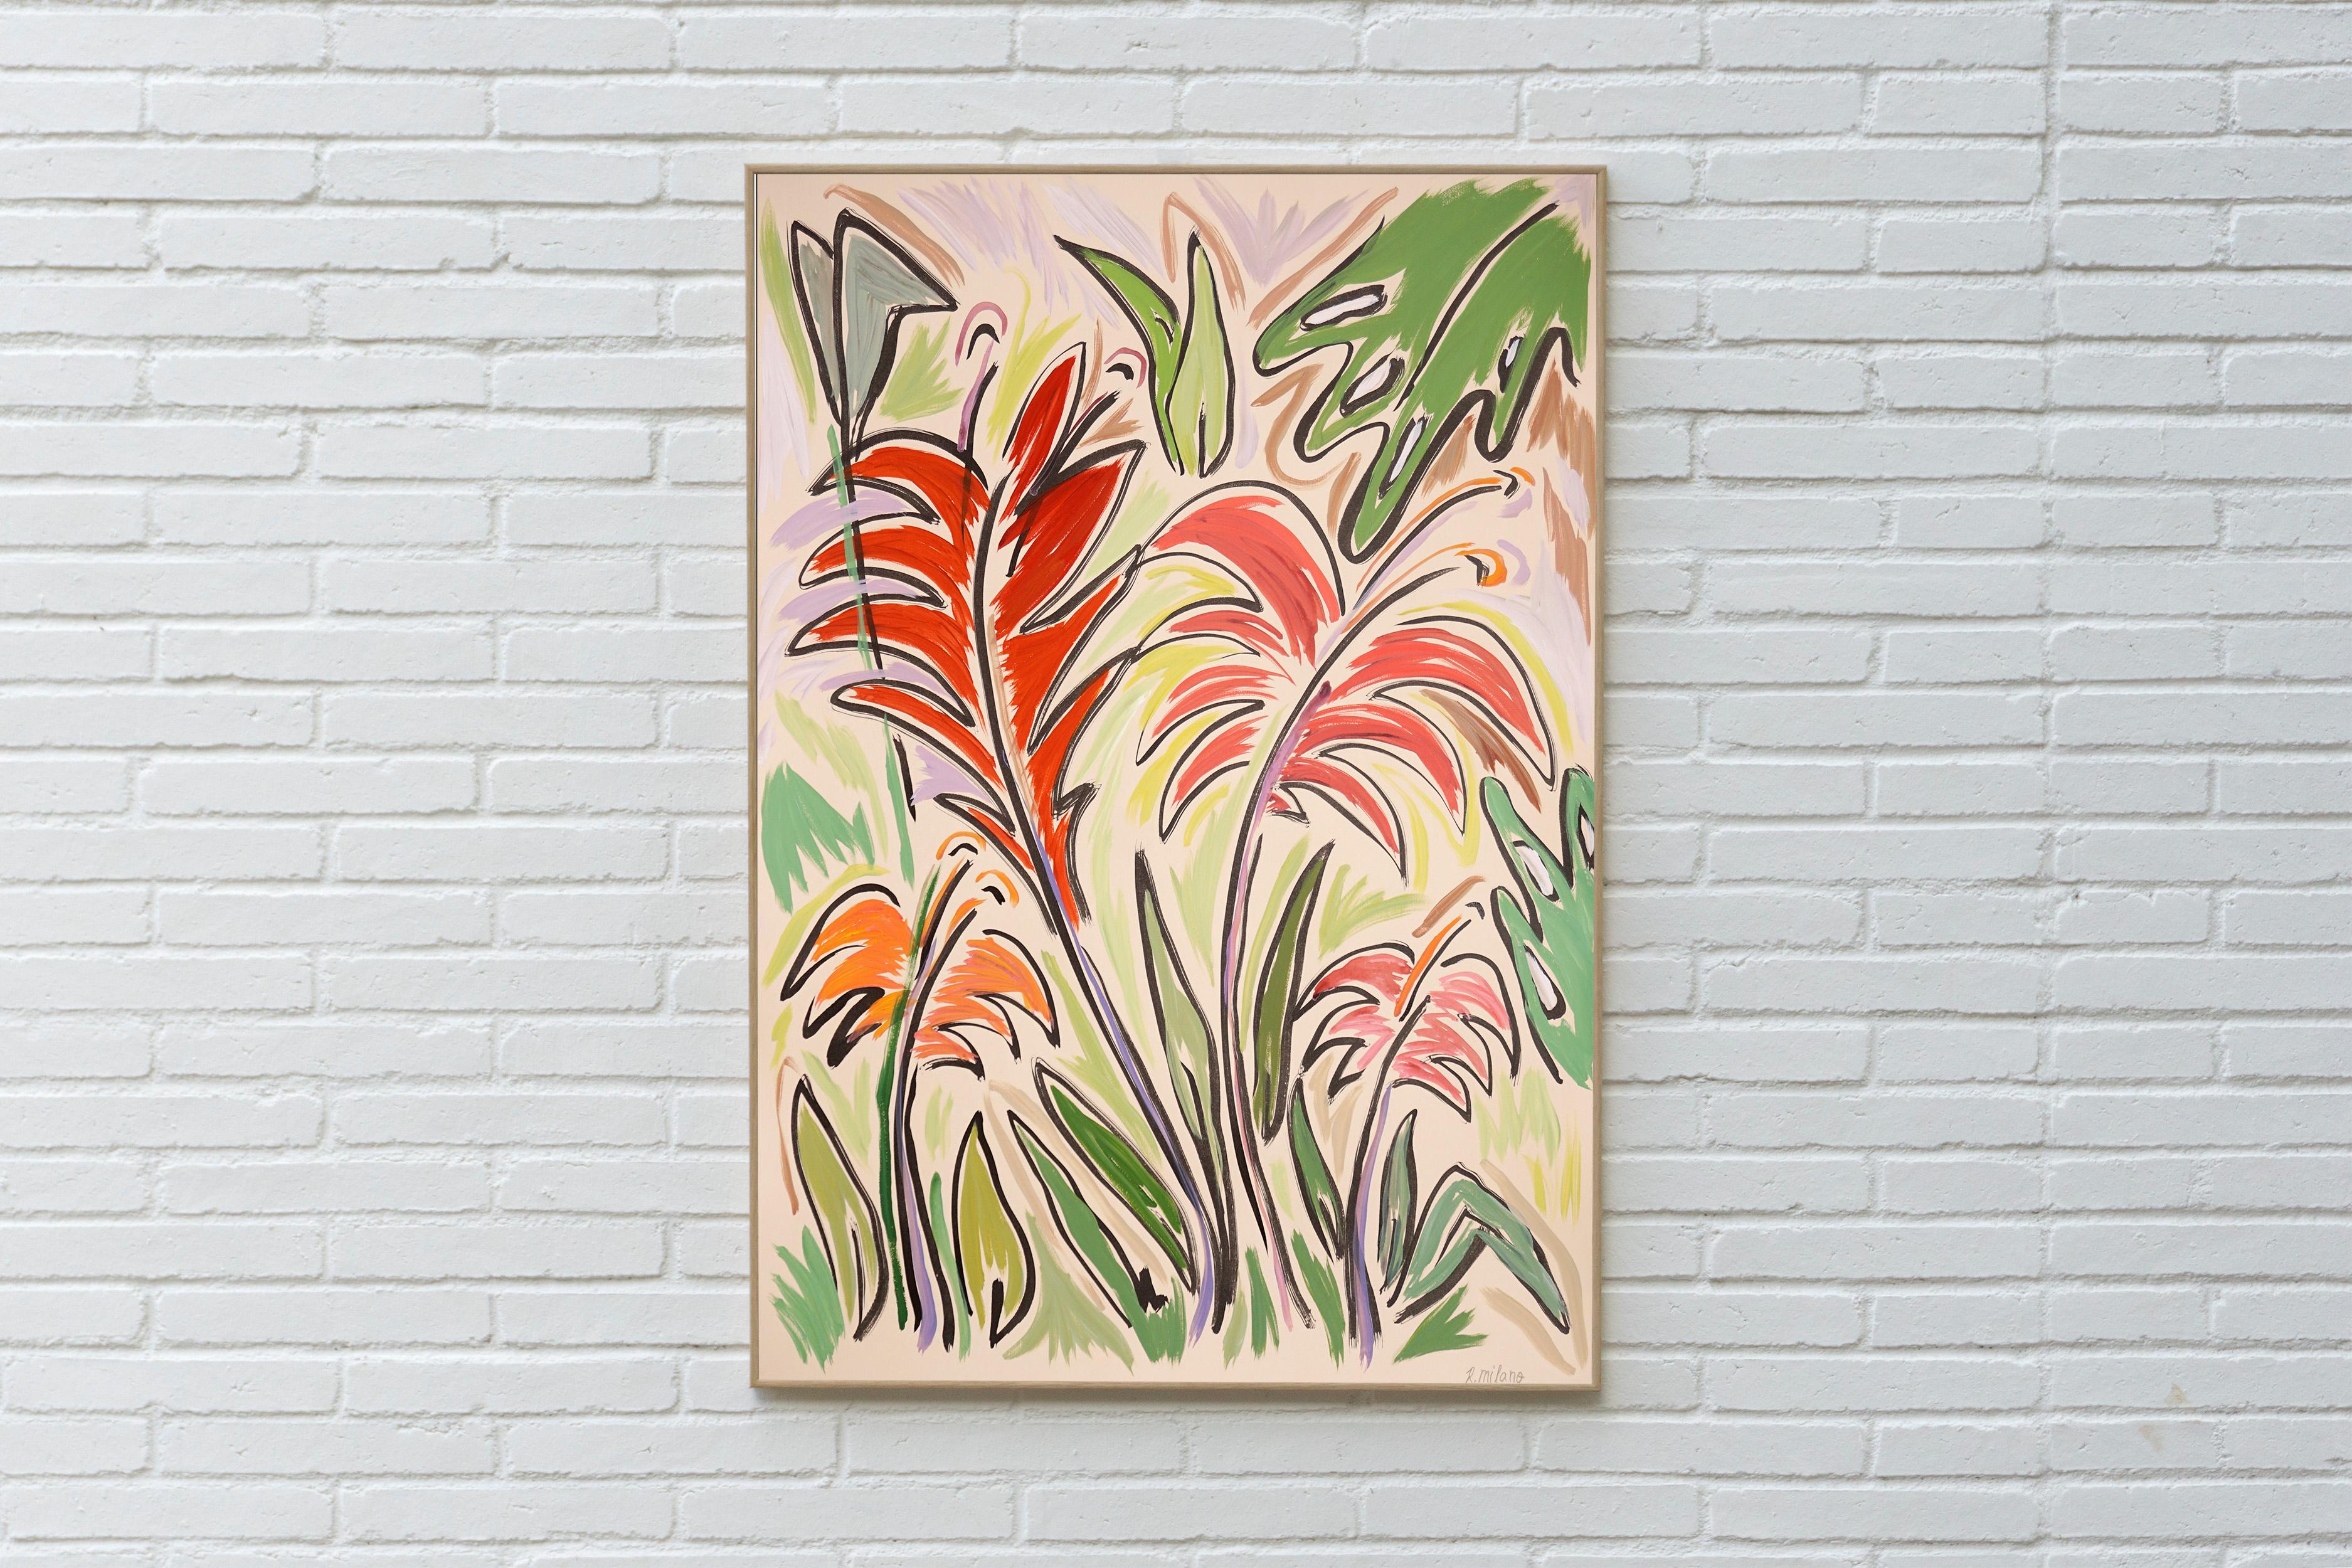 Tropical Garden, Red and Pink Flowers, Green Leaves, Jungle Inspiration Plants - Painting by Romina Milano